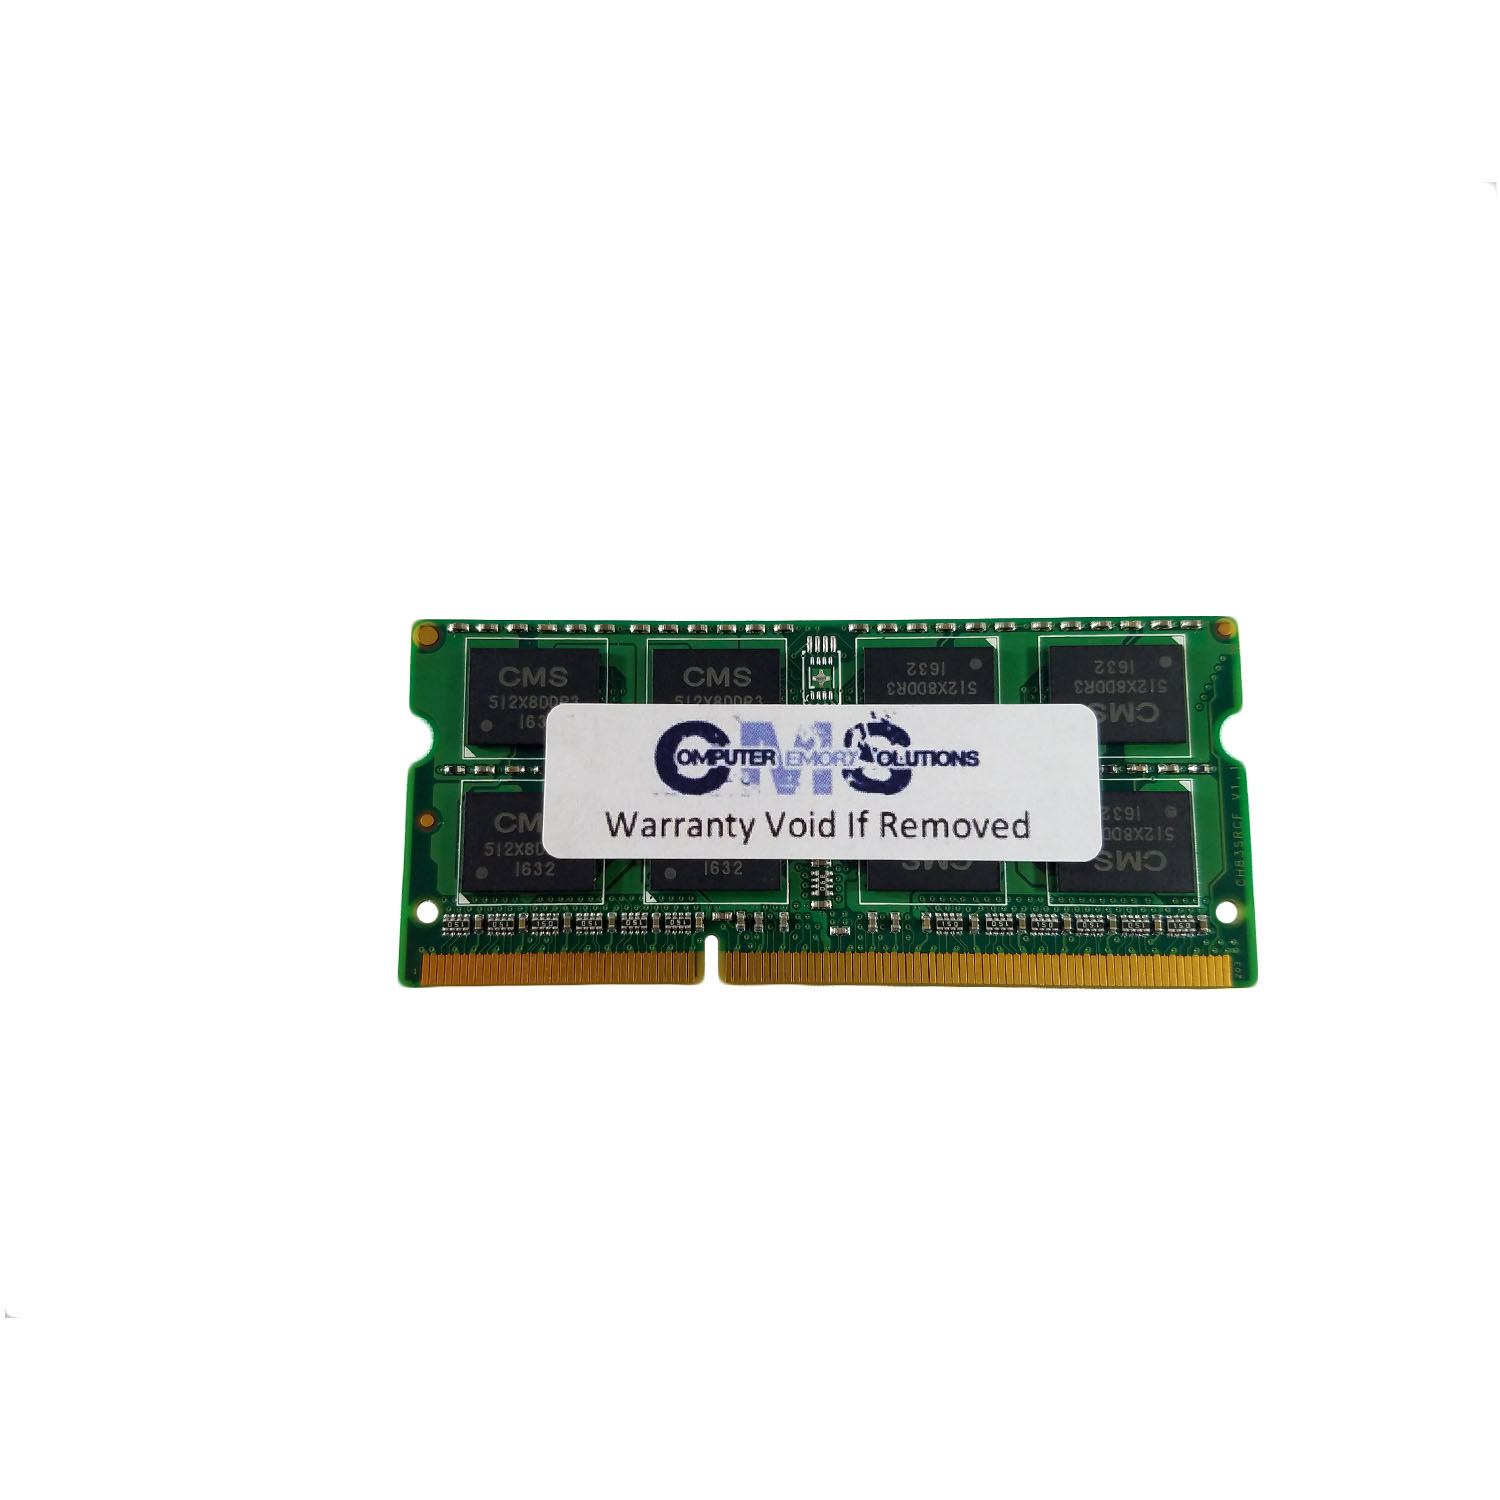 CMS 4GB (1X4GB) DDR3 10600 1333MHZ NON ECC SODIMM Memory Ram Upgrade Compatible with Sony® Vaio E Series Vpceg37Fm/W 14" Notebook - A30 - image 1 of 2